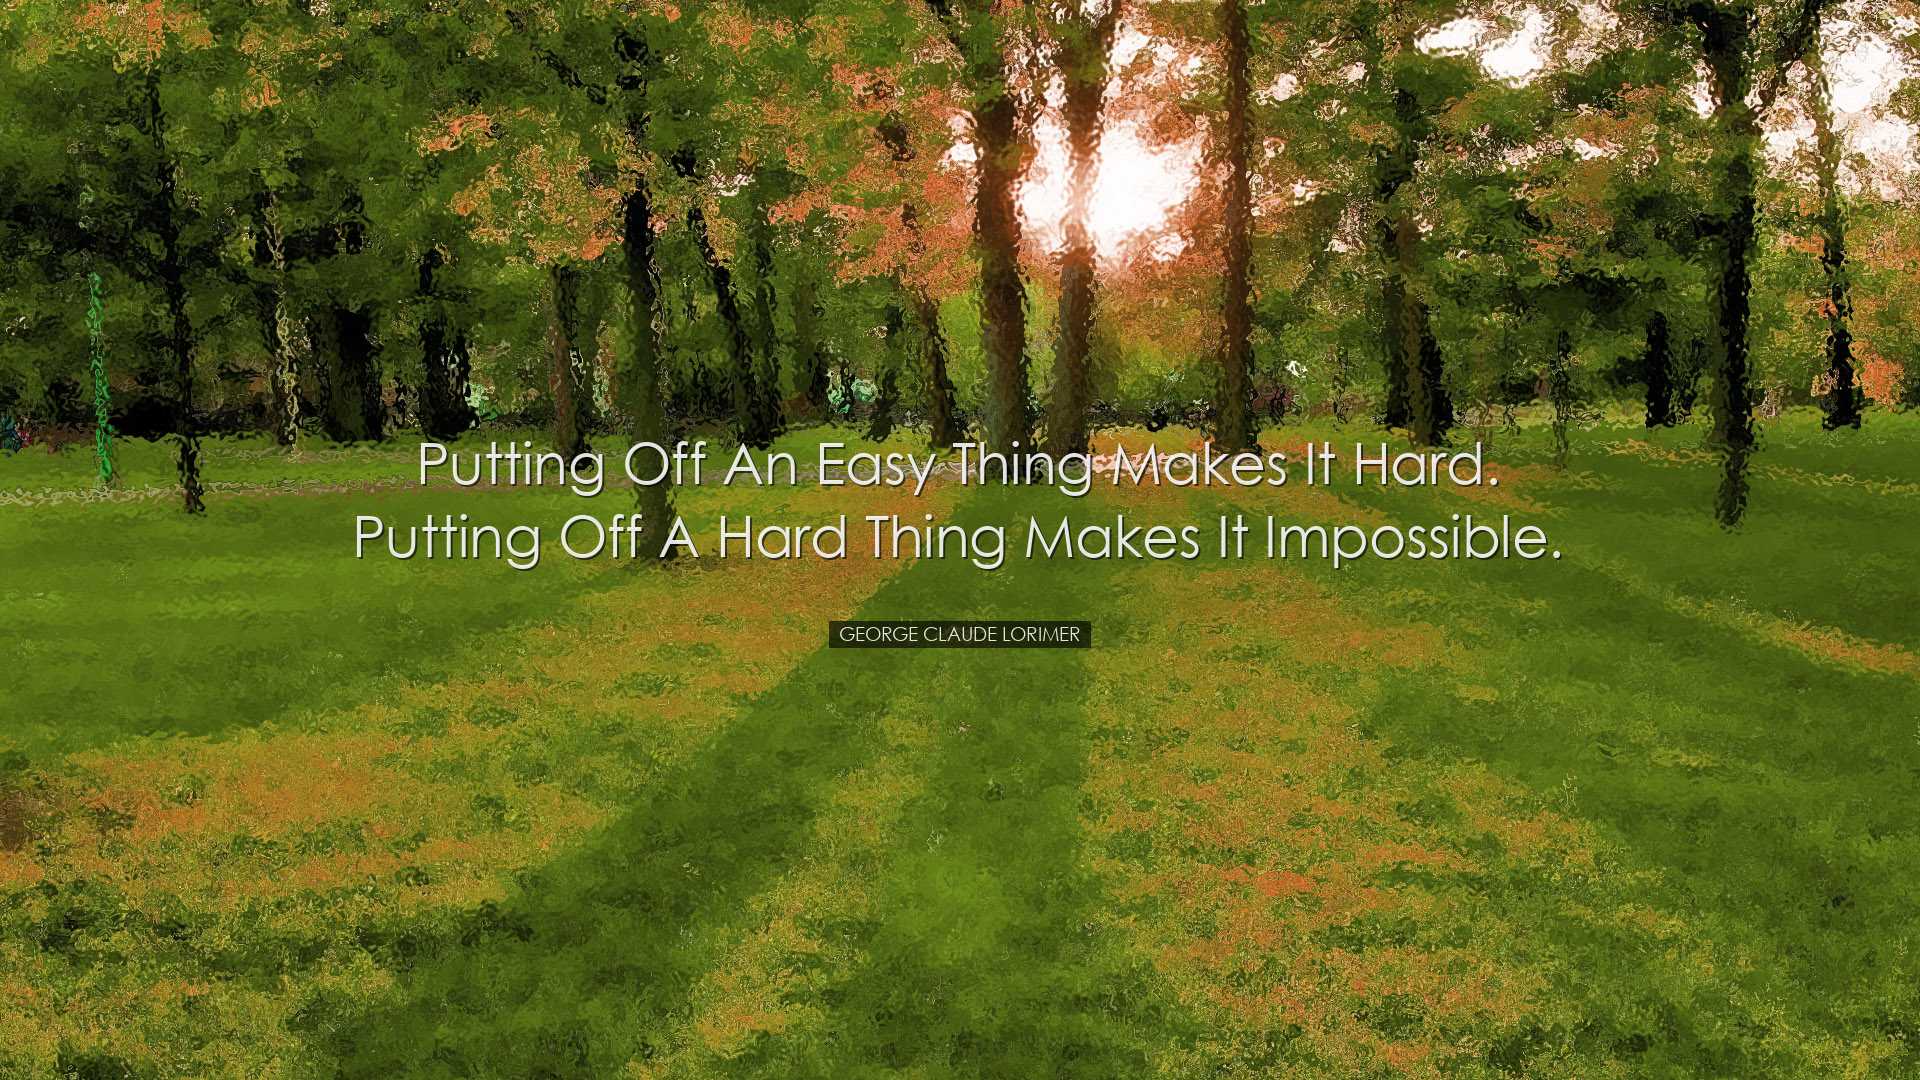 Putting off an easy thing makes it hard. Putting off a hard thing